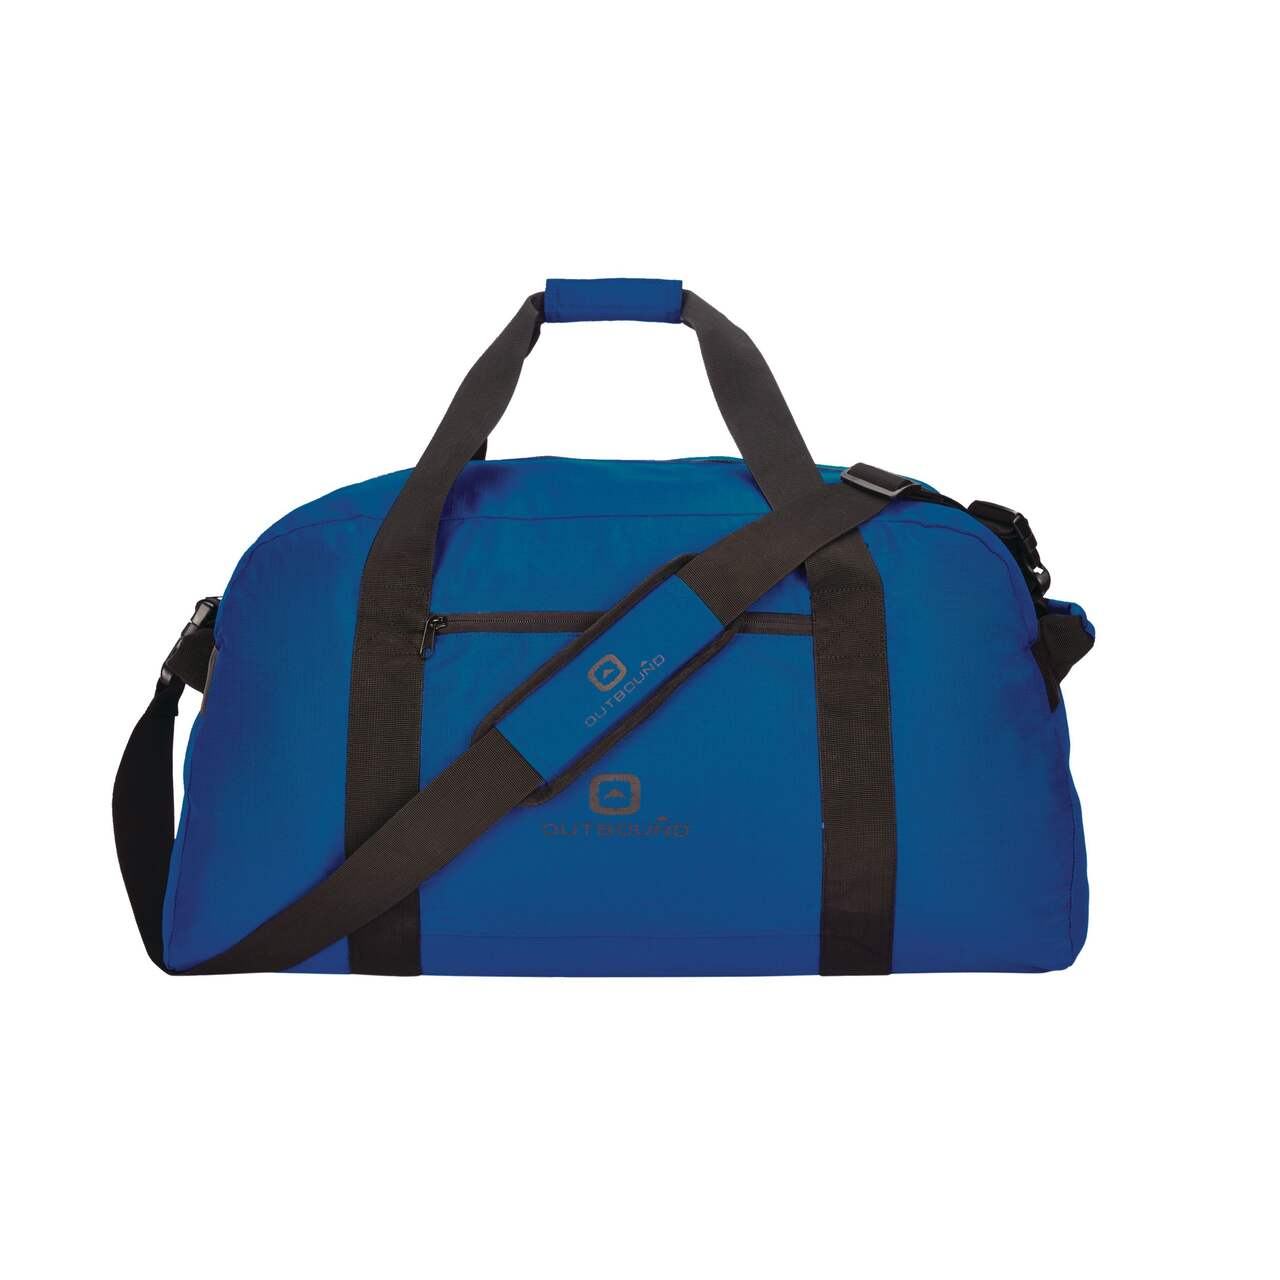 https://media-www.canadiantire.ca/product/playing/camping/backpacks-luggage-accessories/0766198/outbound-medium-90l-duffle-dbe66e7a-3e4e-4b65-acd6-6ce8783a98a0-jpgrendition.jpg?imdensity=1&imwidth=640&impolicy=mZoom